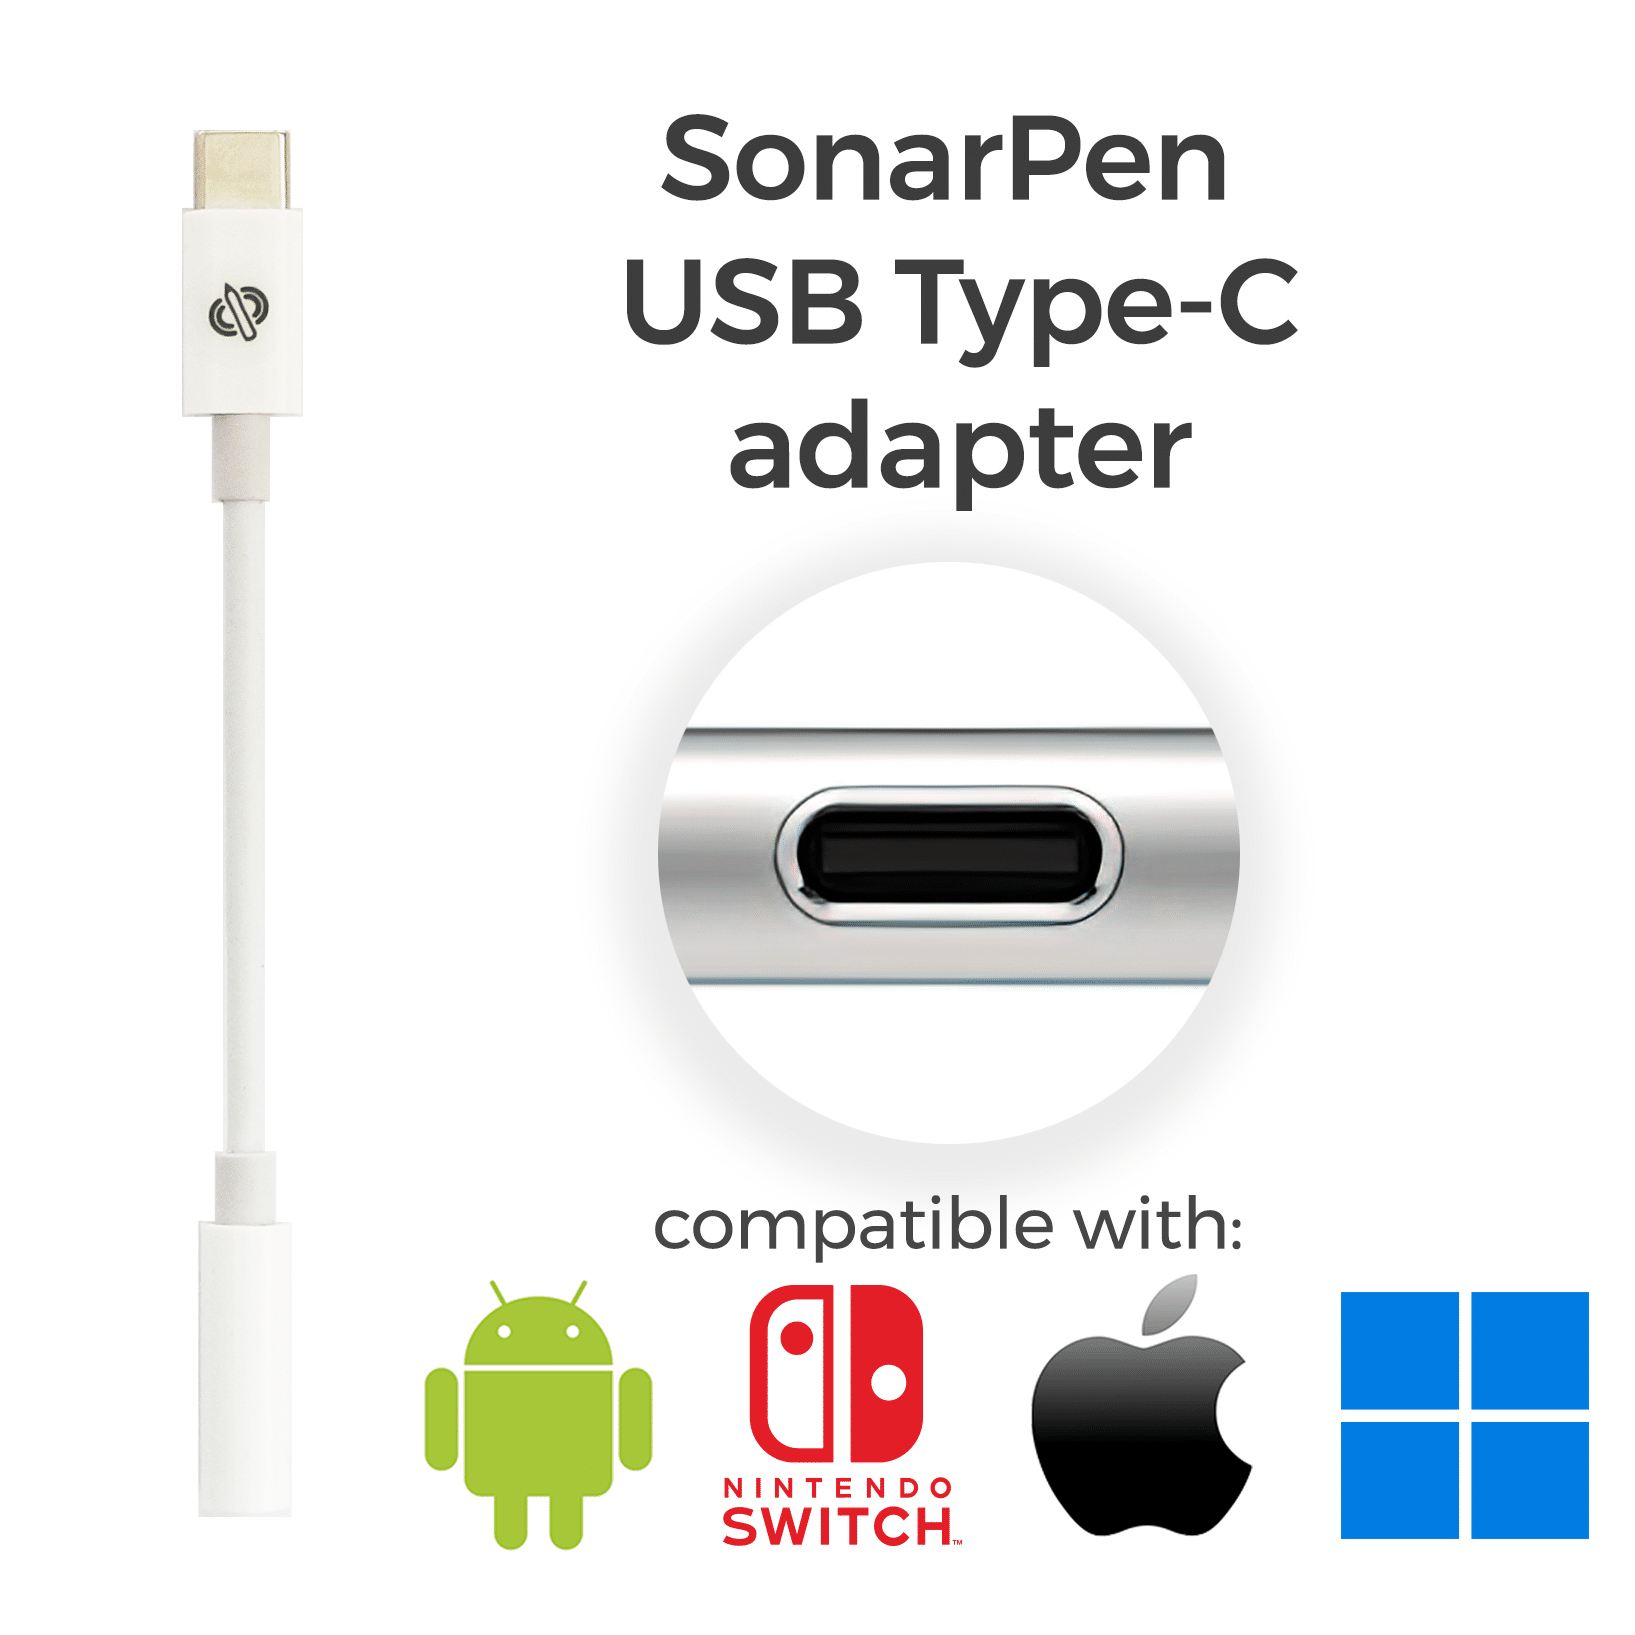 SonarPen USB type C adapter turns devices into powerful drawing pad